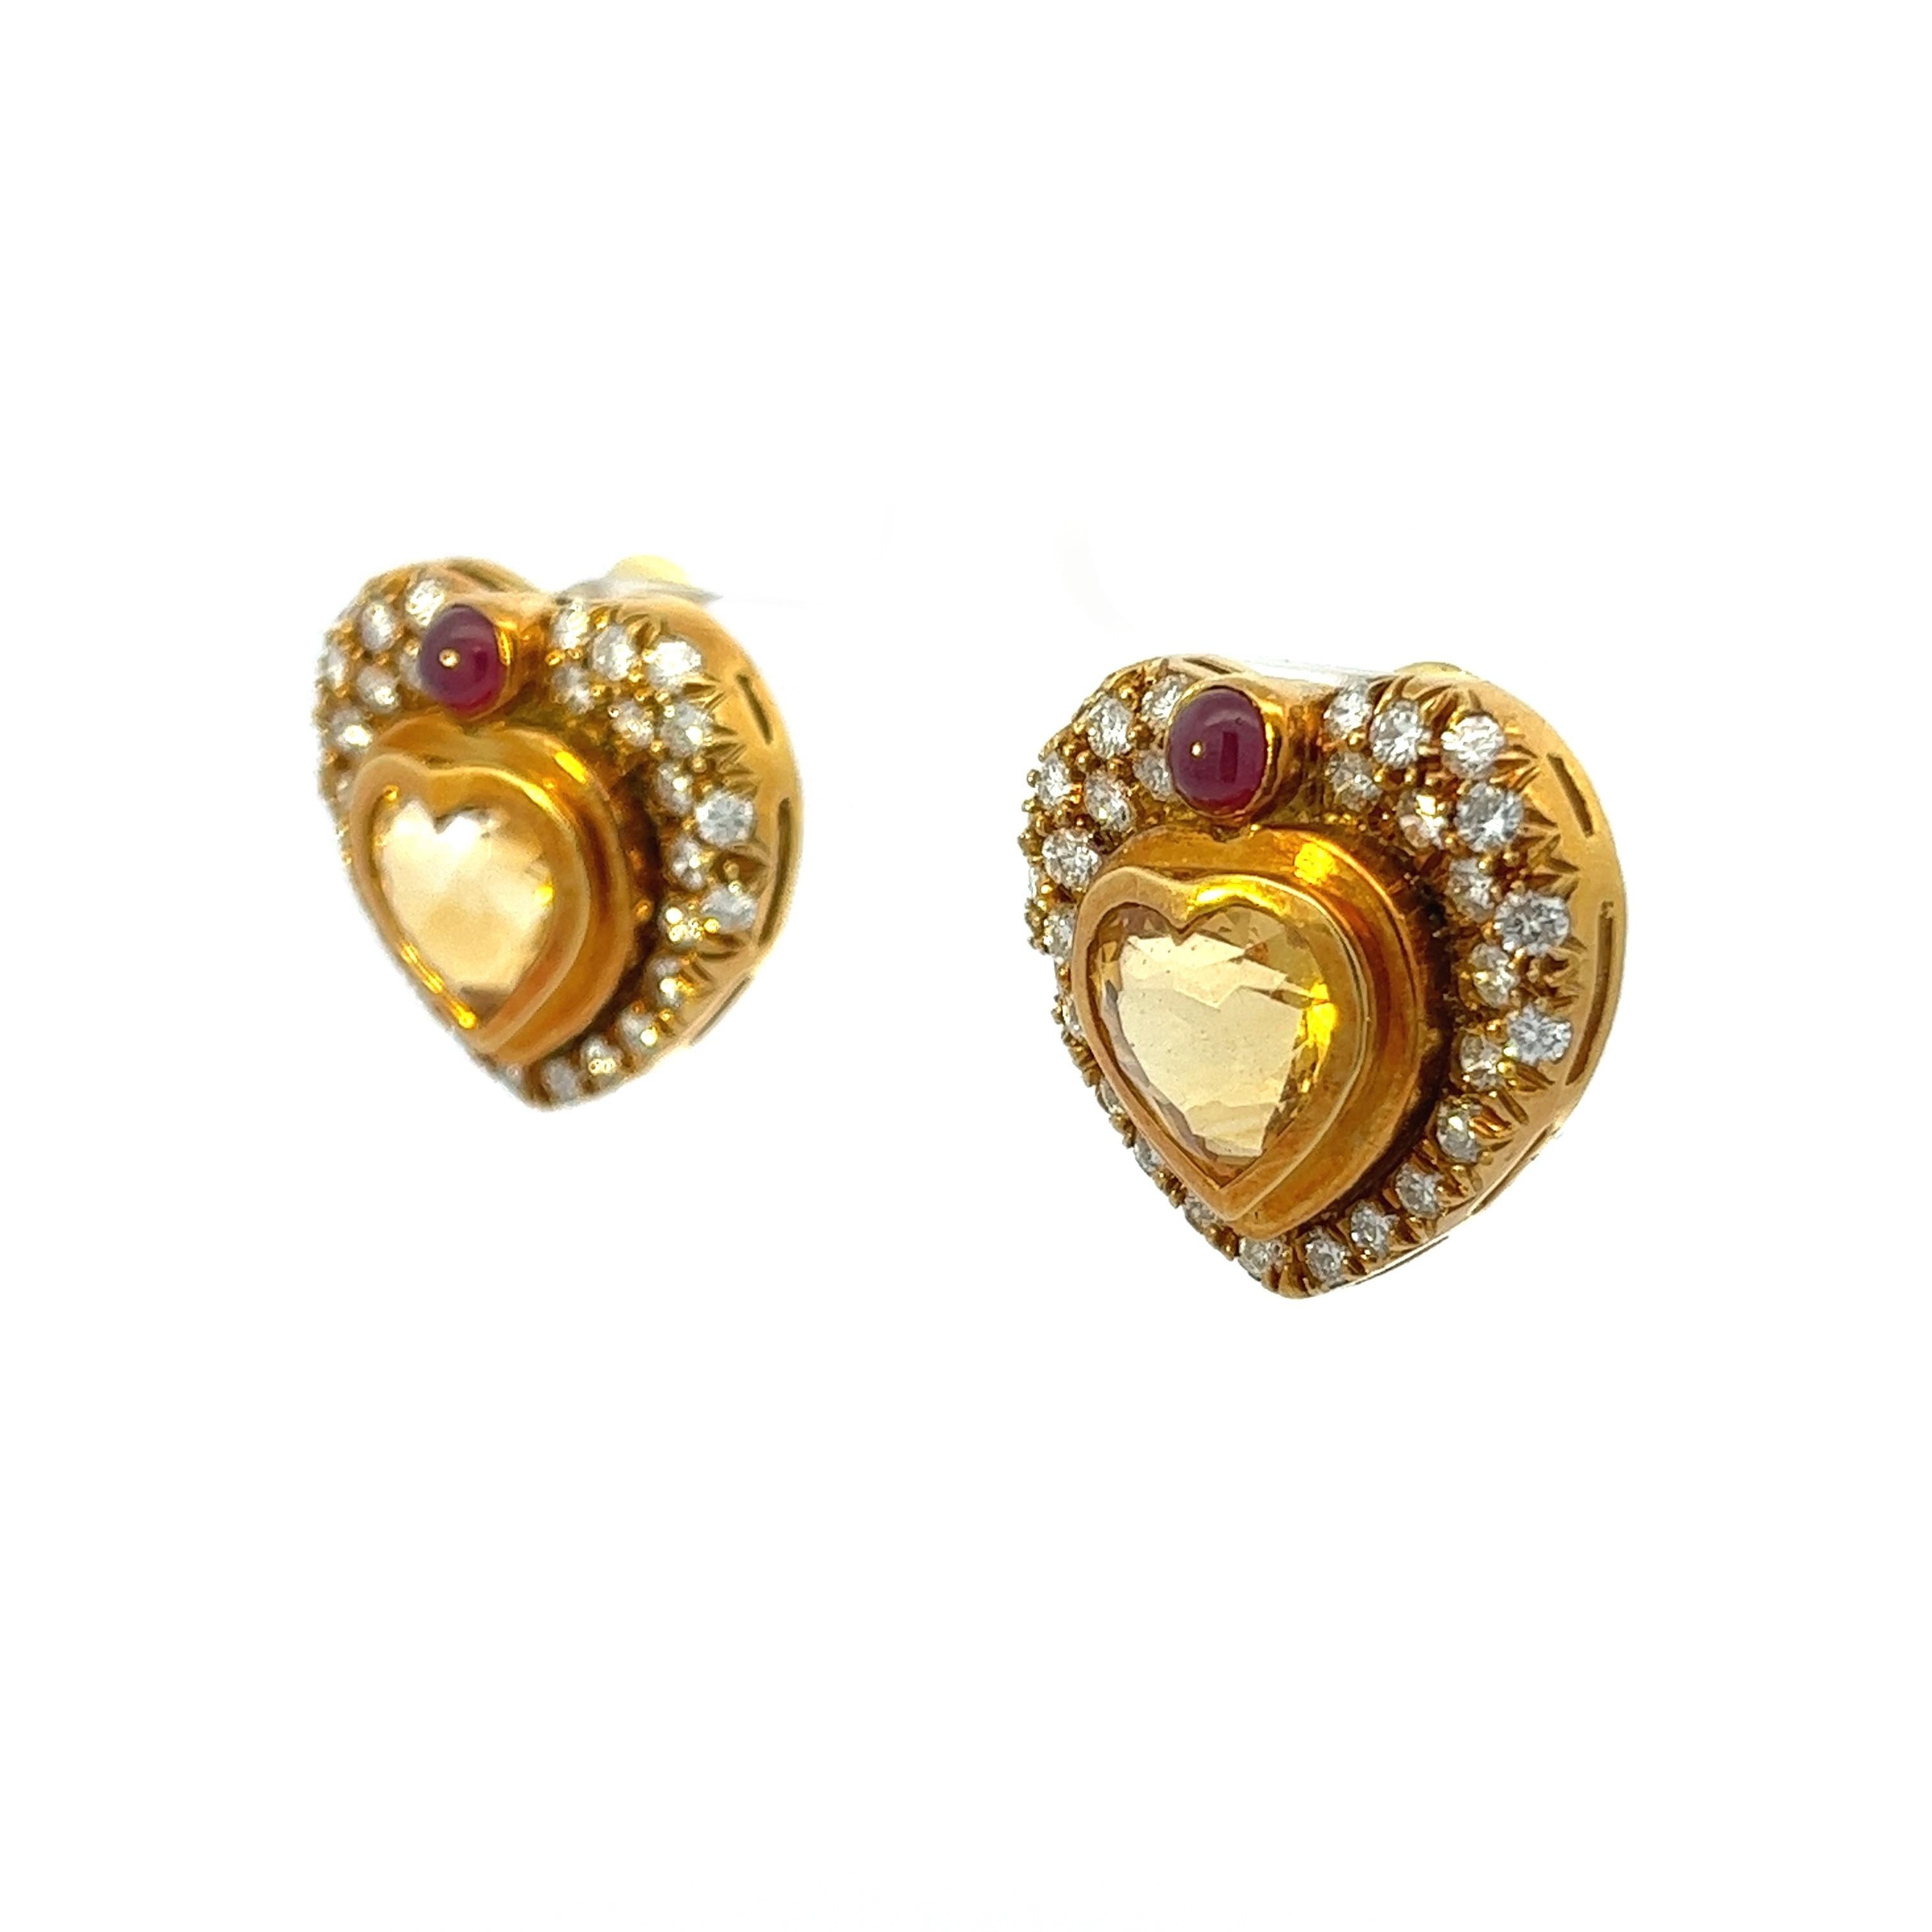 18k classic vintage heart earrings with G H color and VS diamonds totaling 1.86ctw. In the center of the piece sits beautiful honey colored heart shape citrine stones totaling approximately 4.04ctw between the two stones. The cherry on top is the